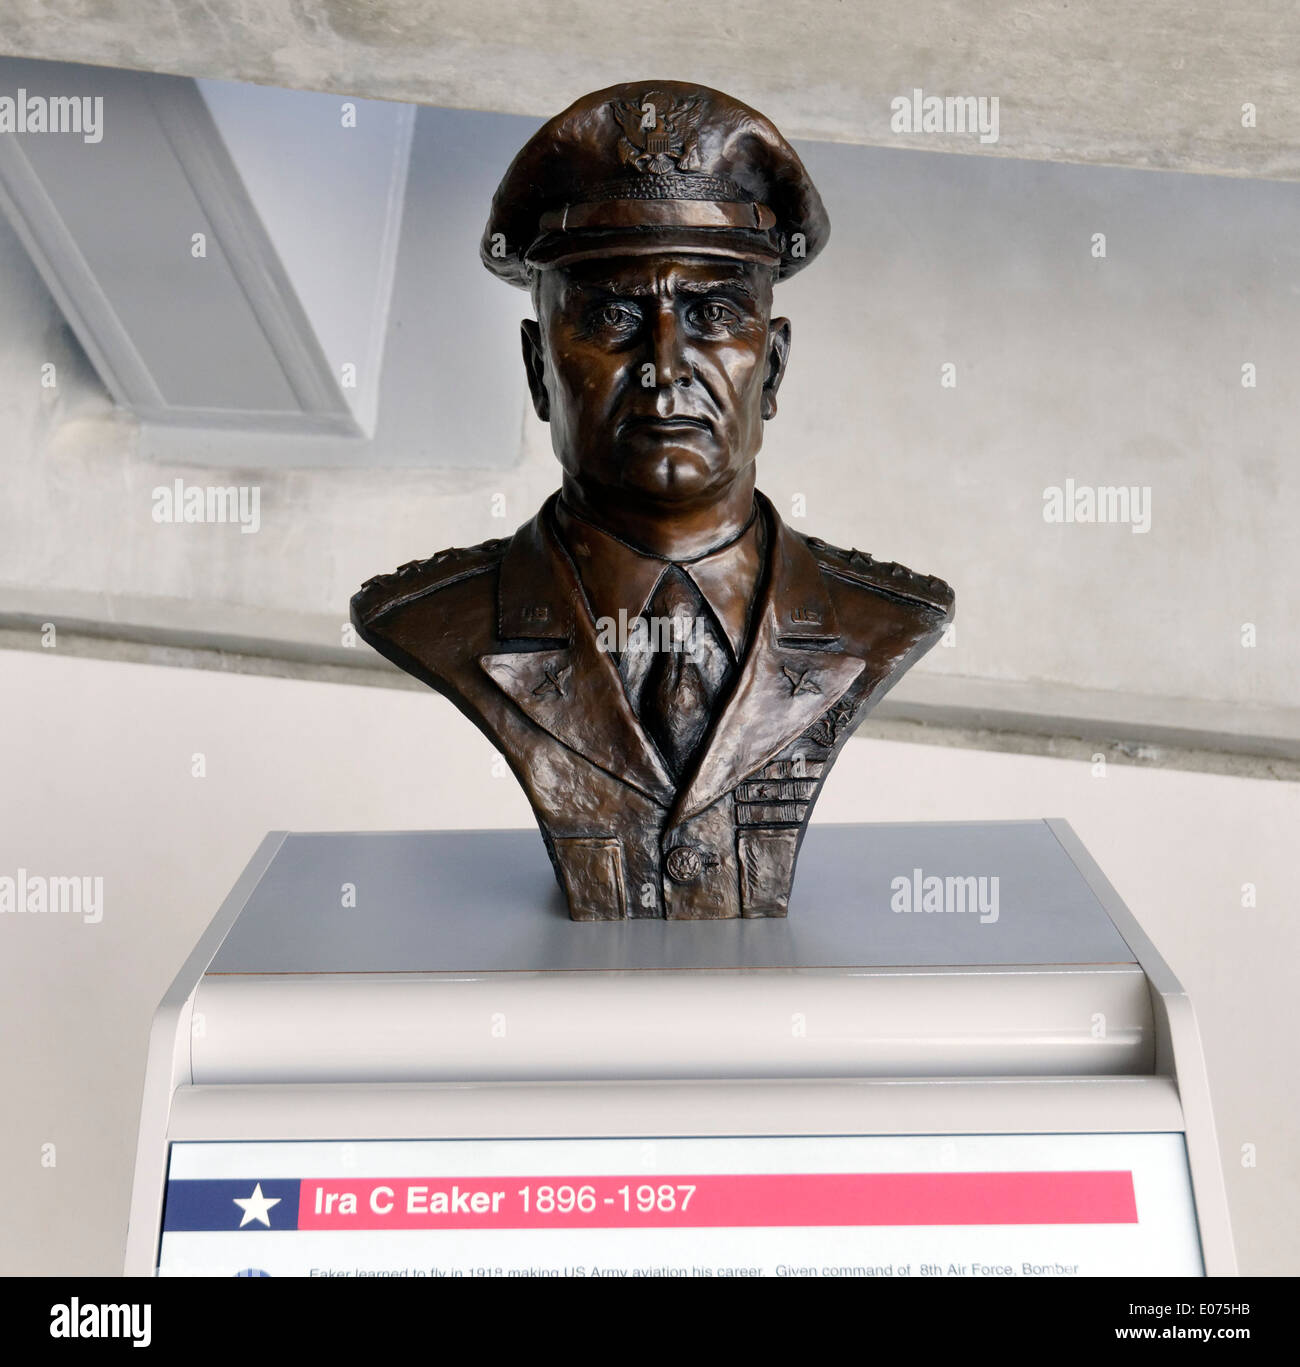 A bust of Ira Eaker, head of the US eight Air Force during WW2, at Duxford Air Museum Stock Photo